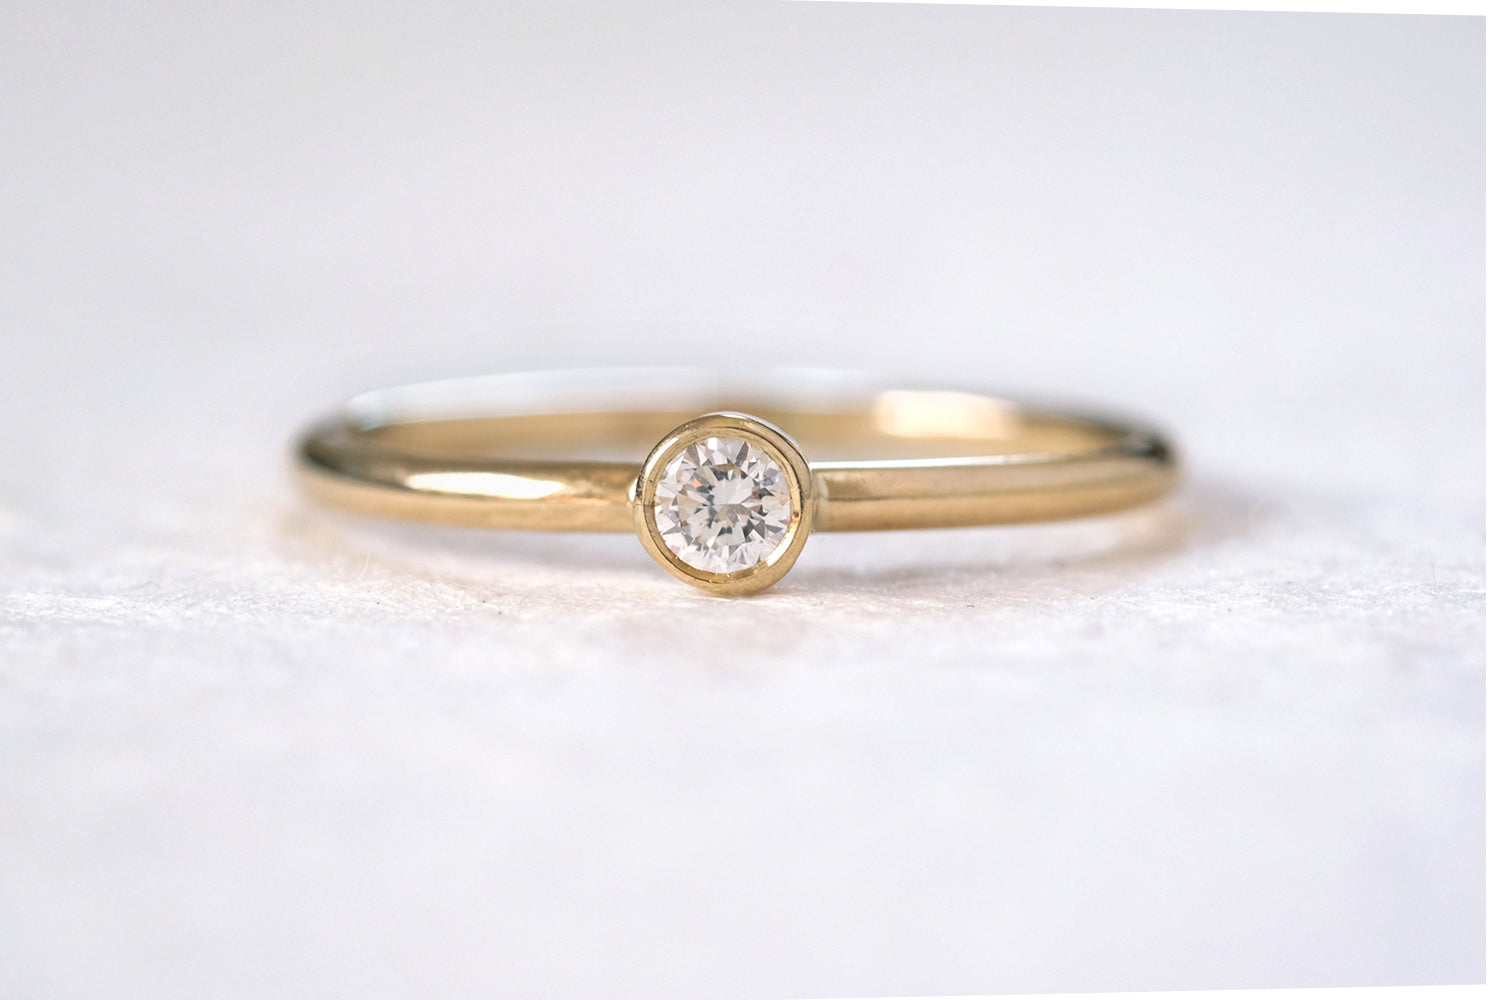 Engagement Gold Ring Set With A Single Diamond